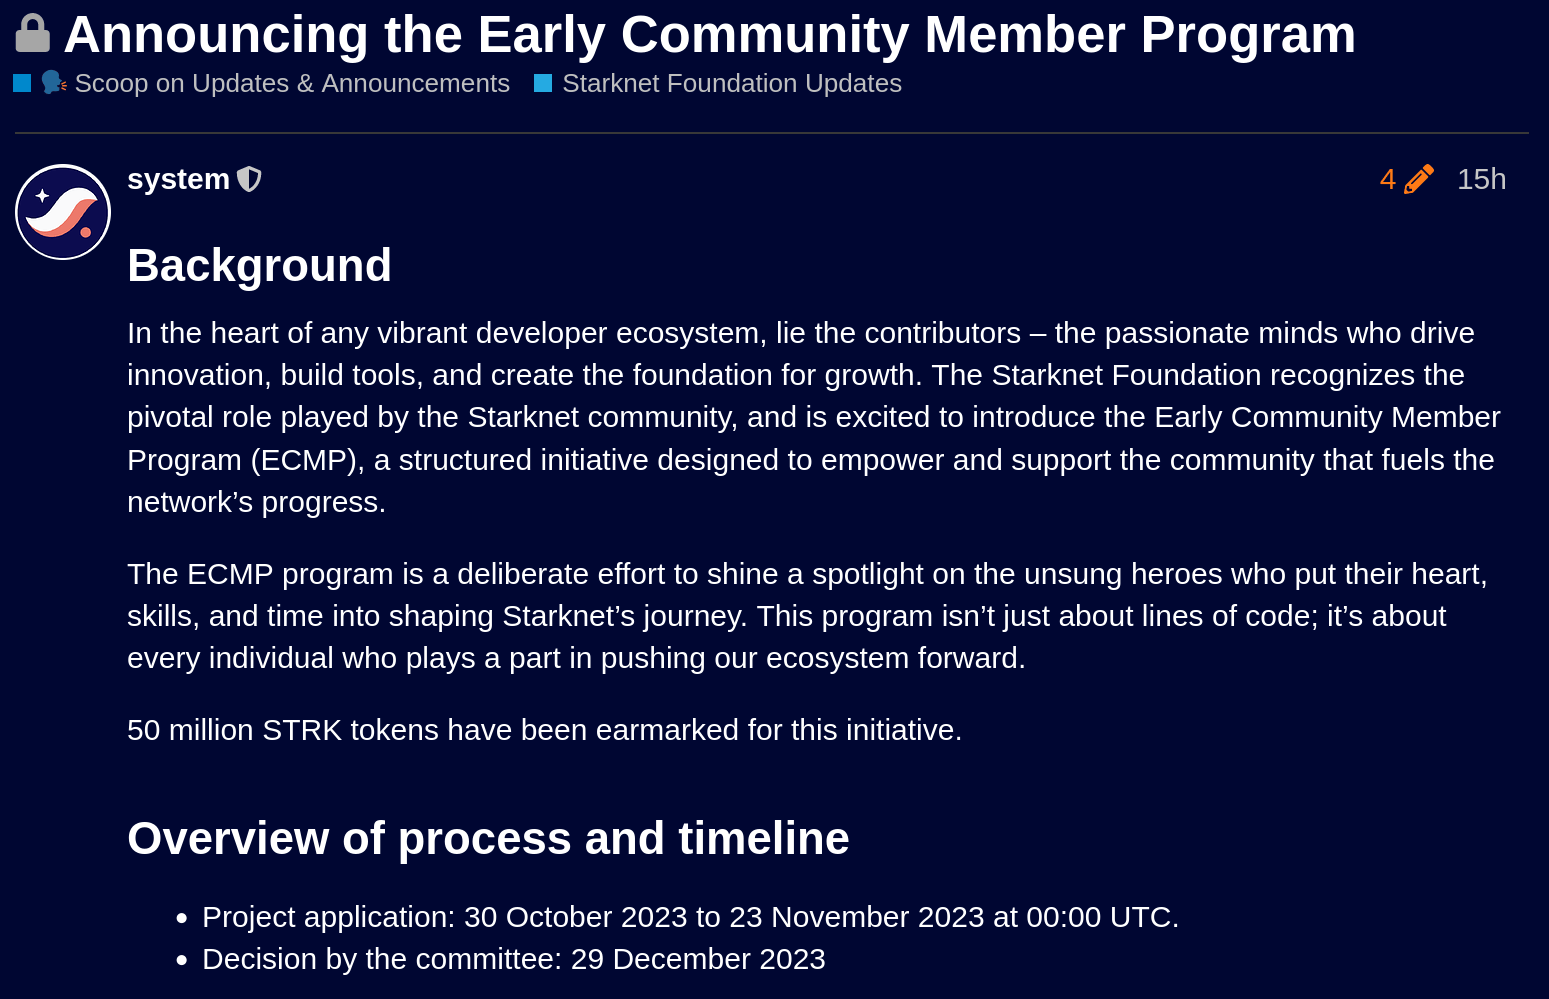 Starknet announces its Early Community Member Program to distribute its STRK tokens